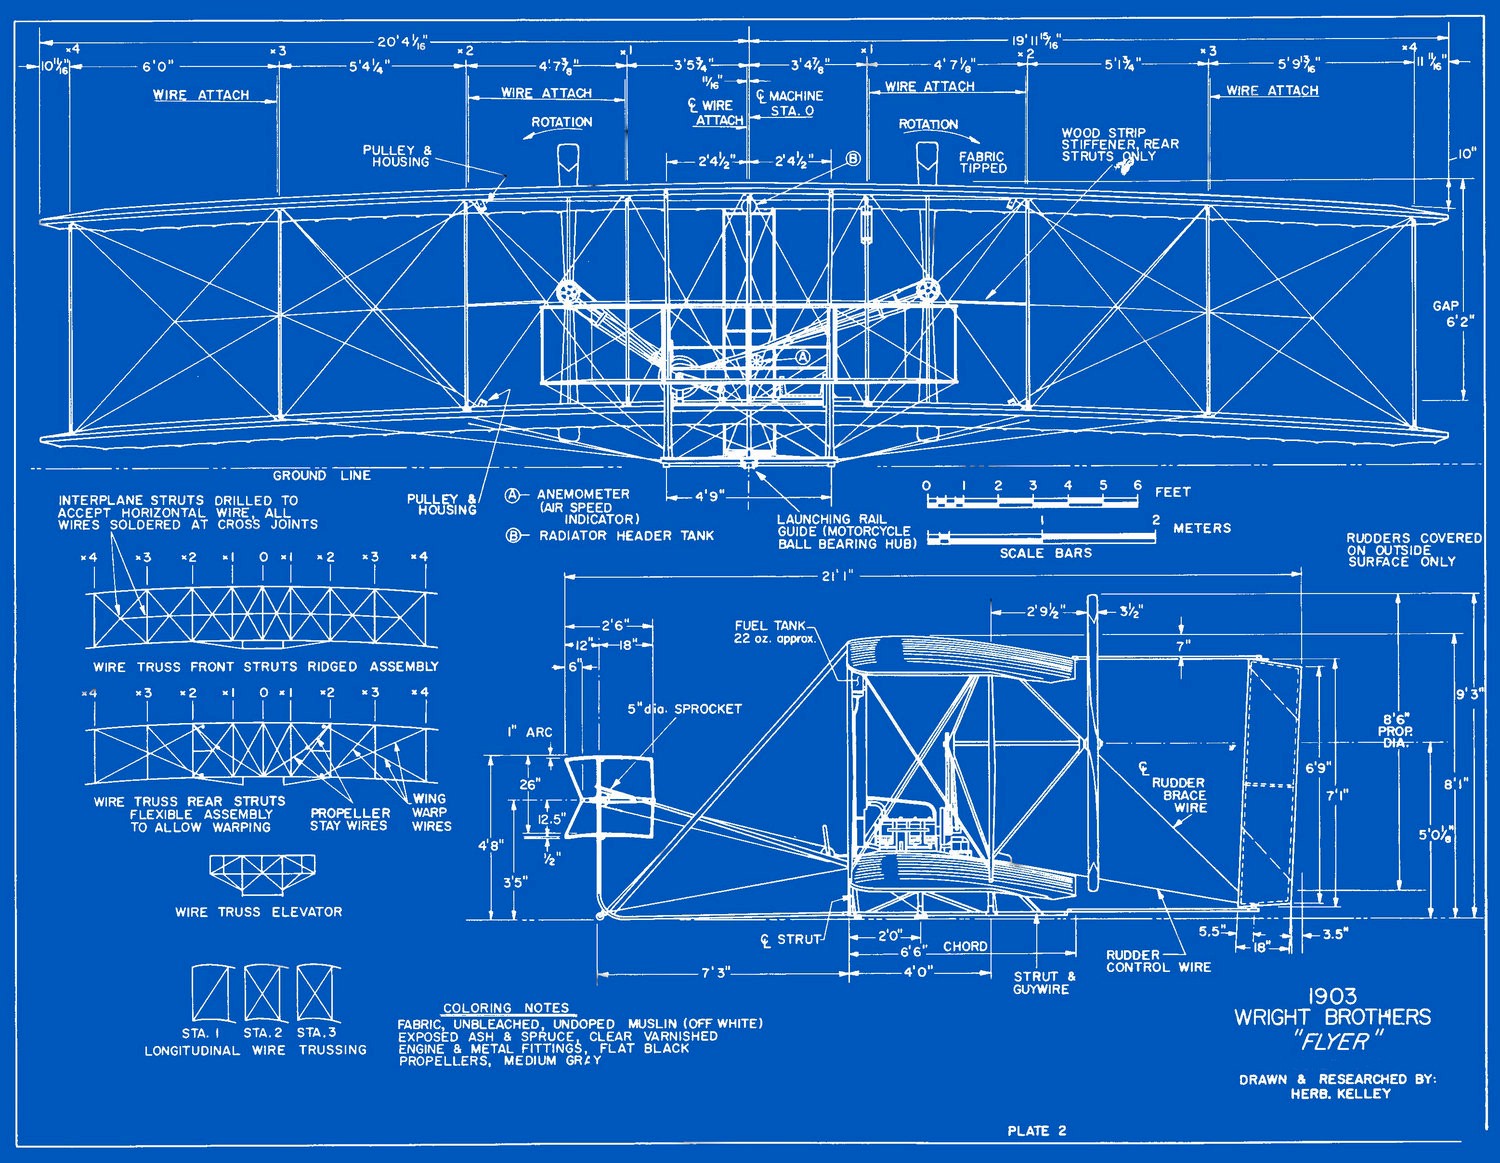 Boat plans and dimensions blueprint urban | Doela